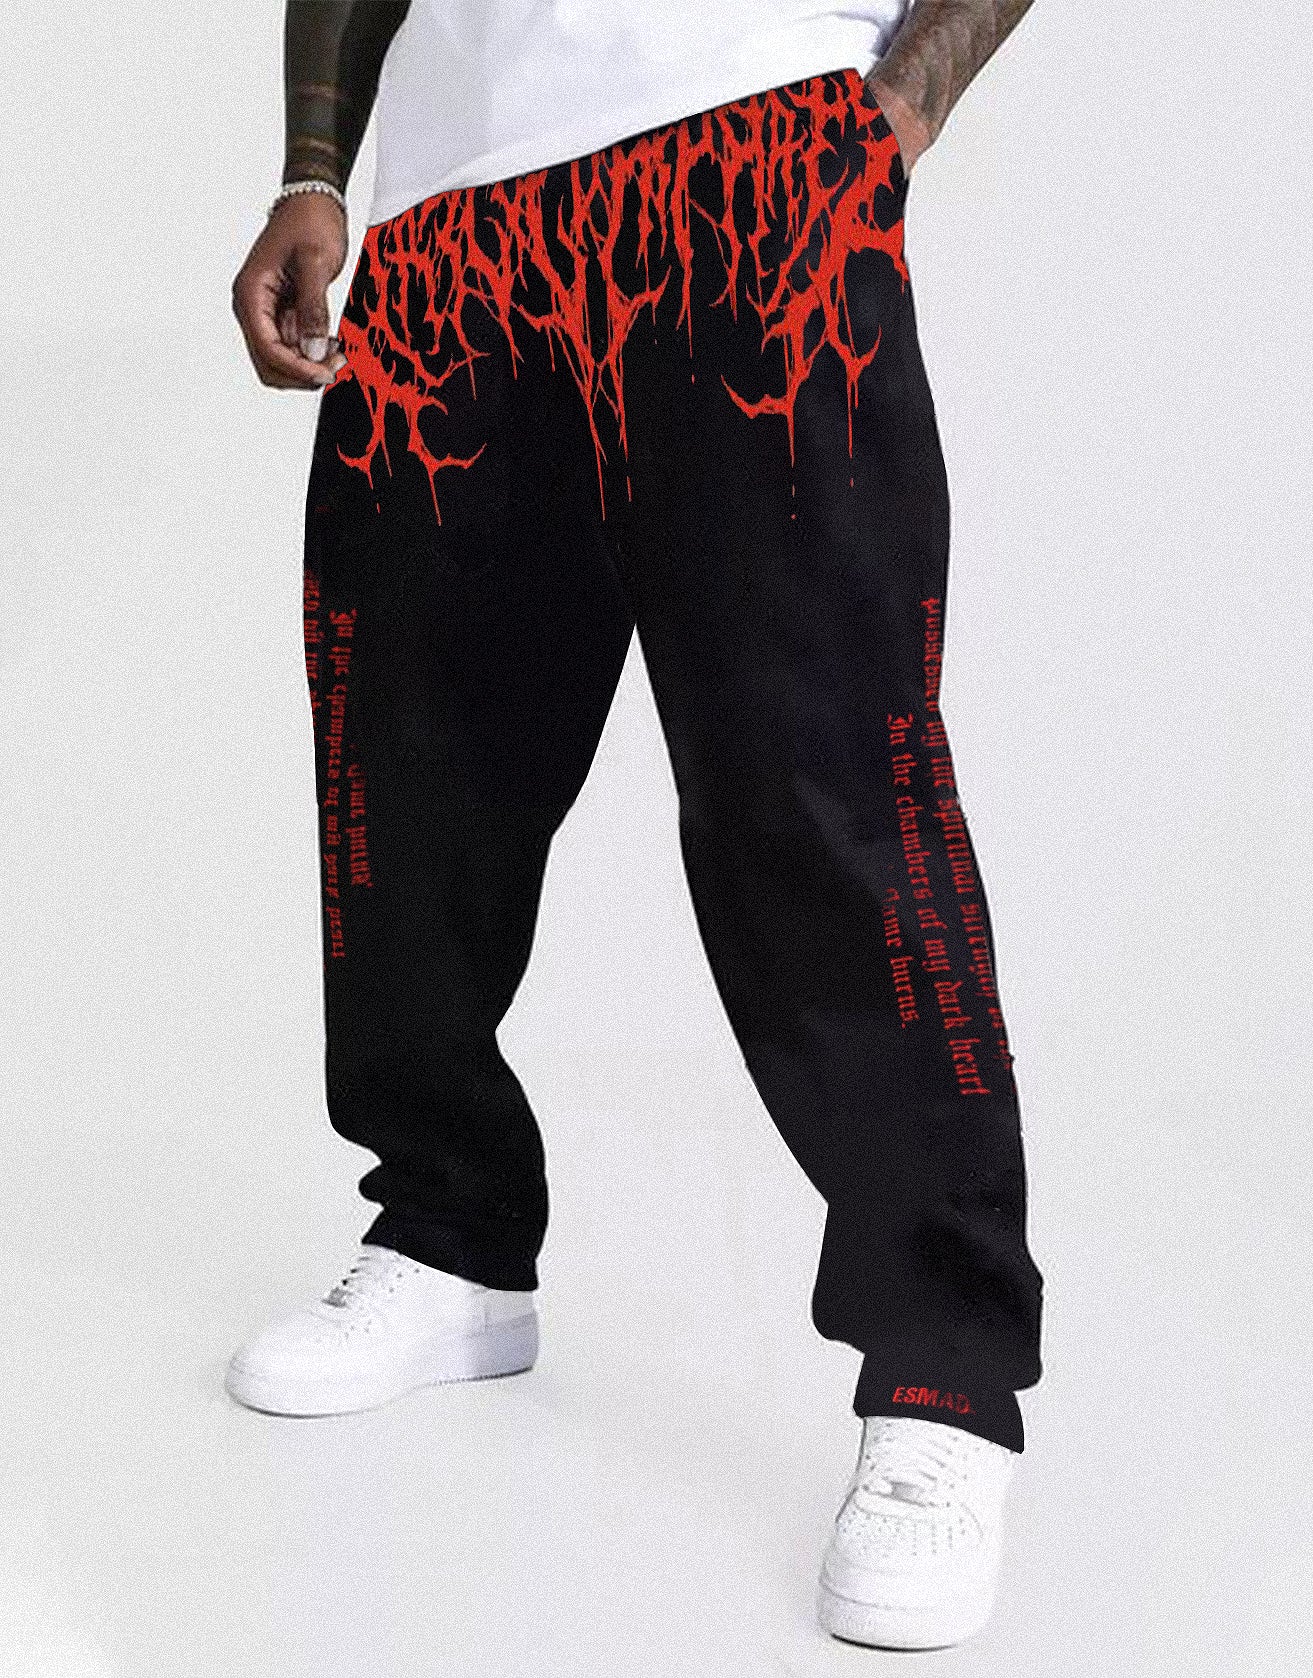 Blood Red Coil Devil Casual Sweatpants